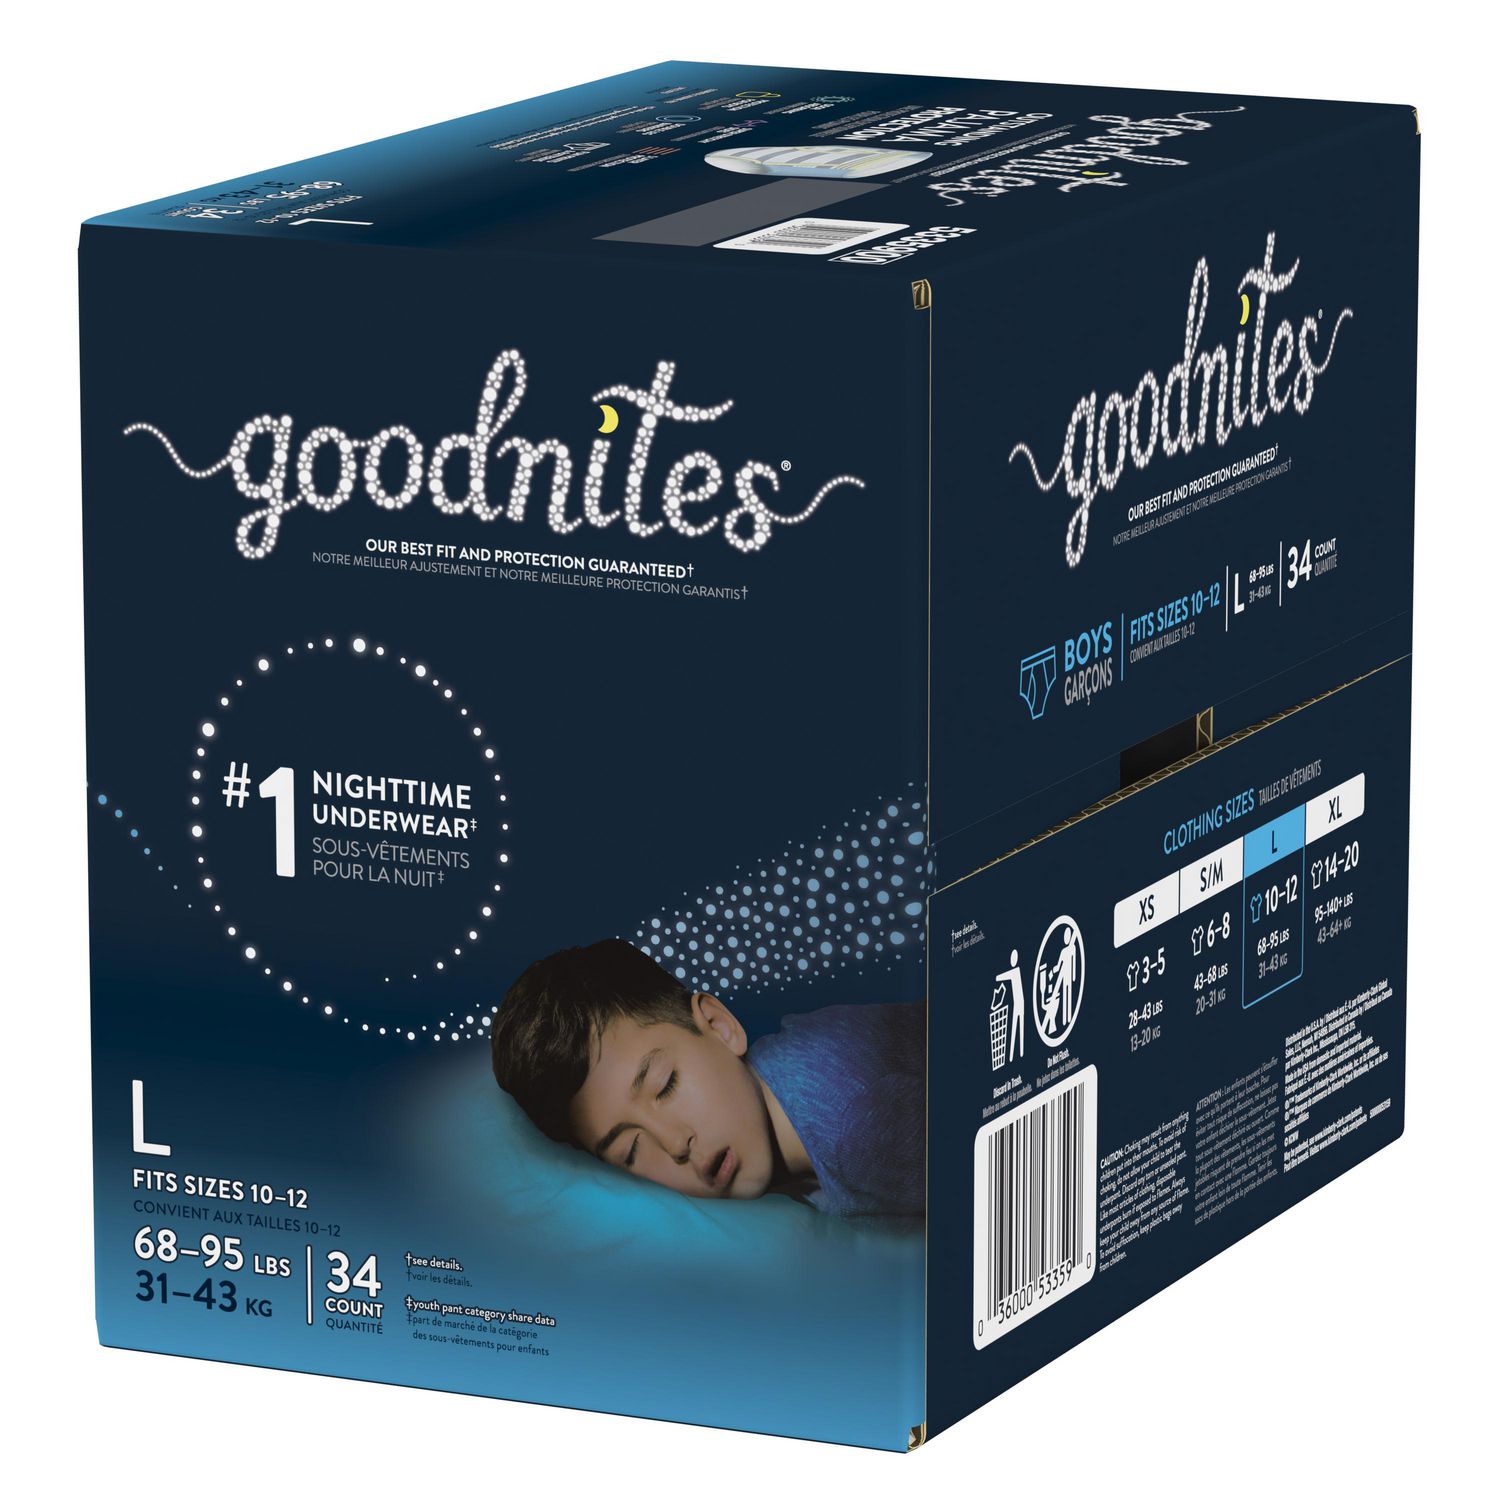 Goodnites Bedwetting Underwear for Boys, S/M, Discreet, Small/Medium, 22  Count (Pack of 2), Packaging may Vary Small/Medium (44 Count)